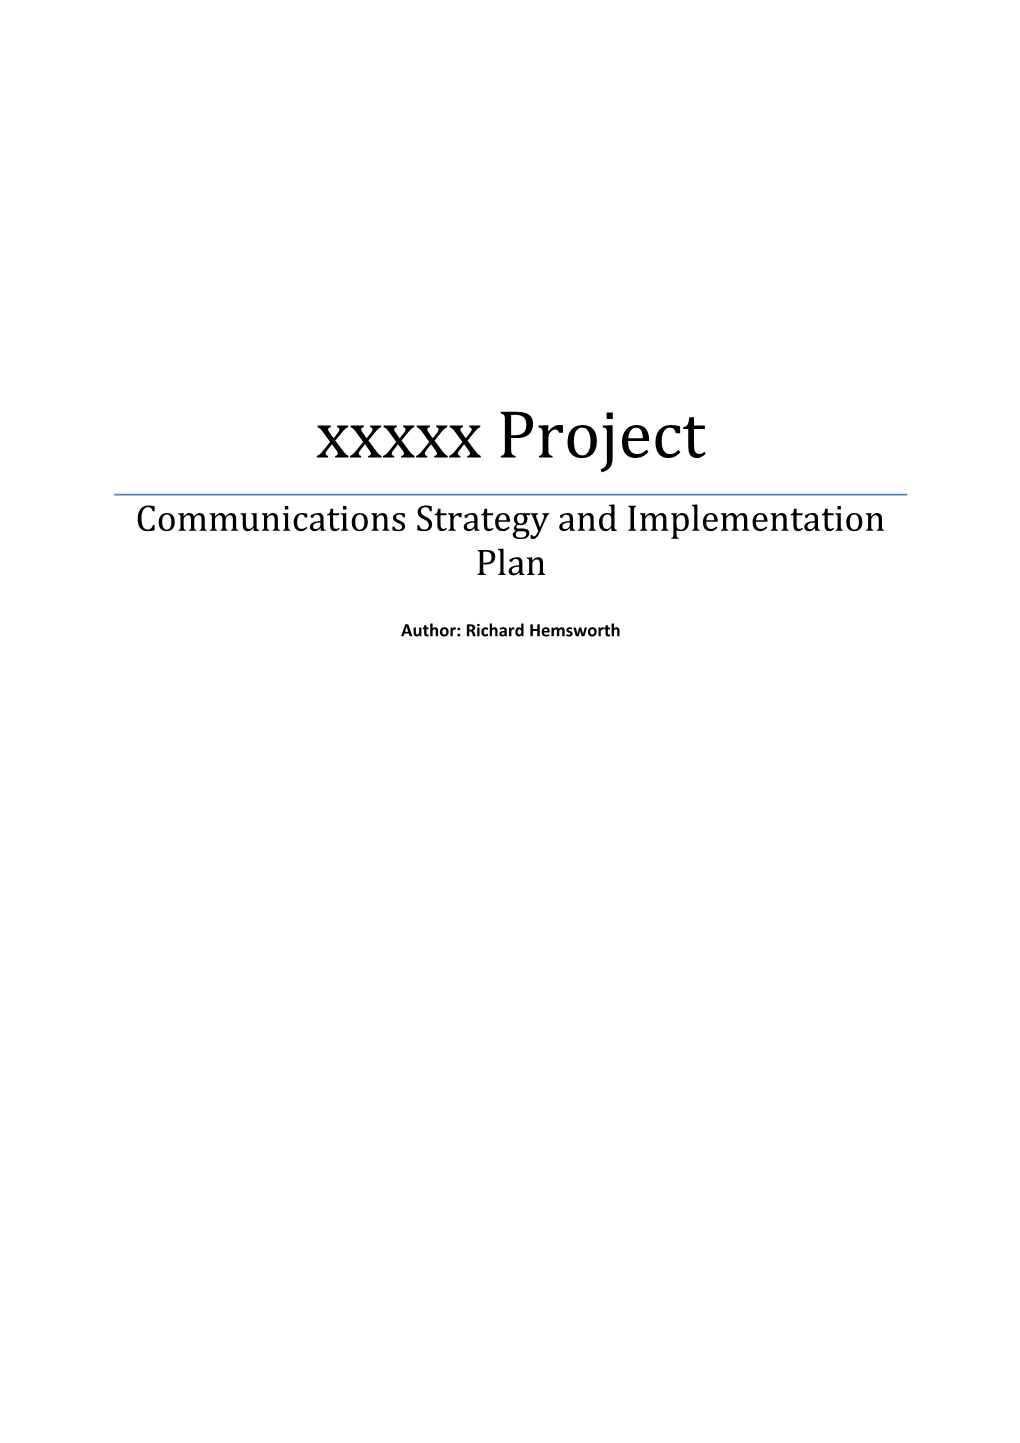 Communications Strategy and Implementation Plan